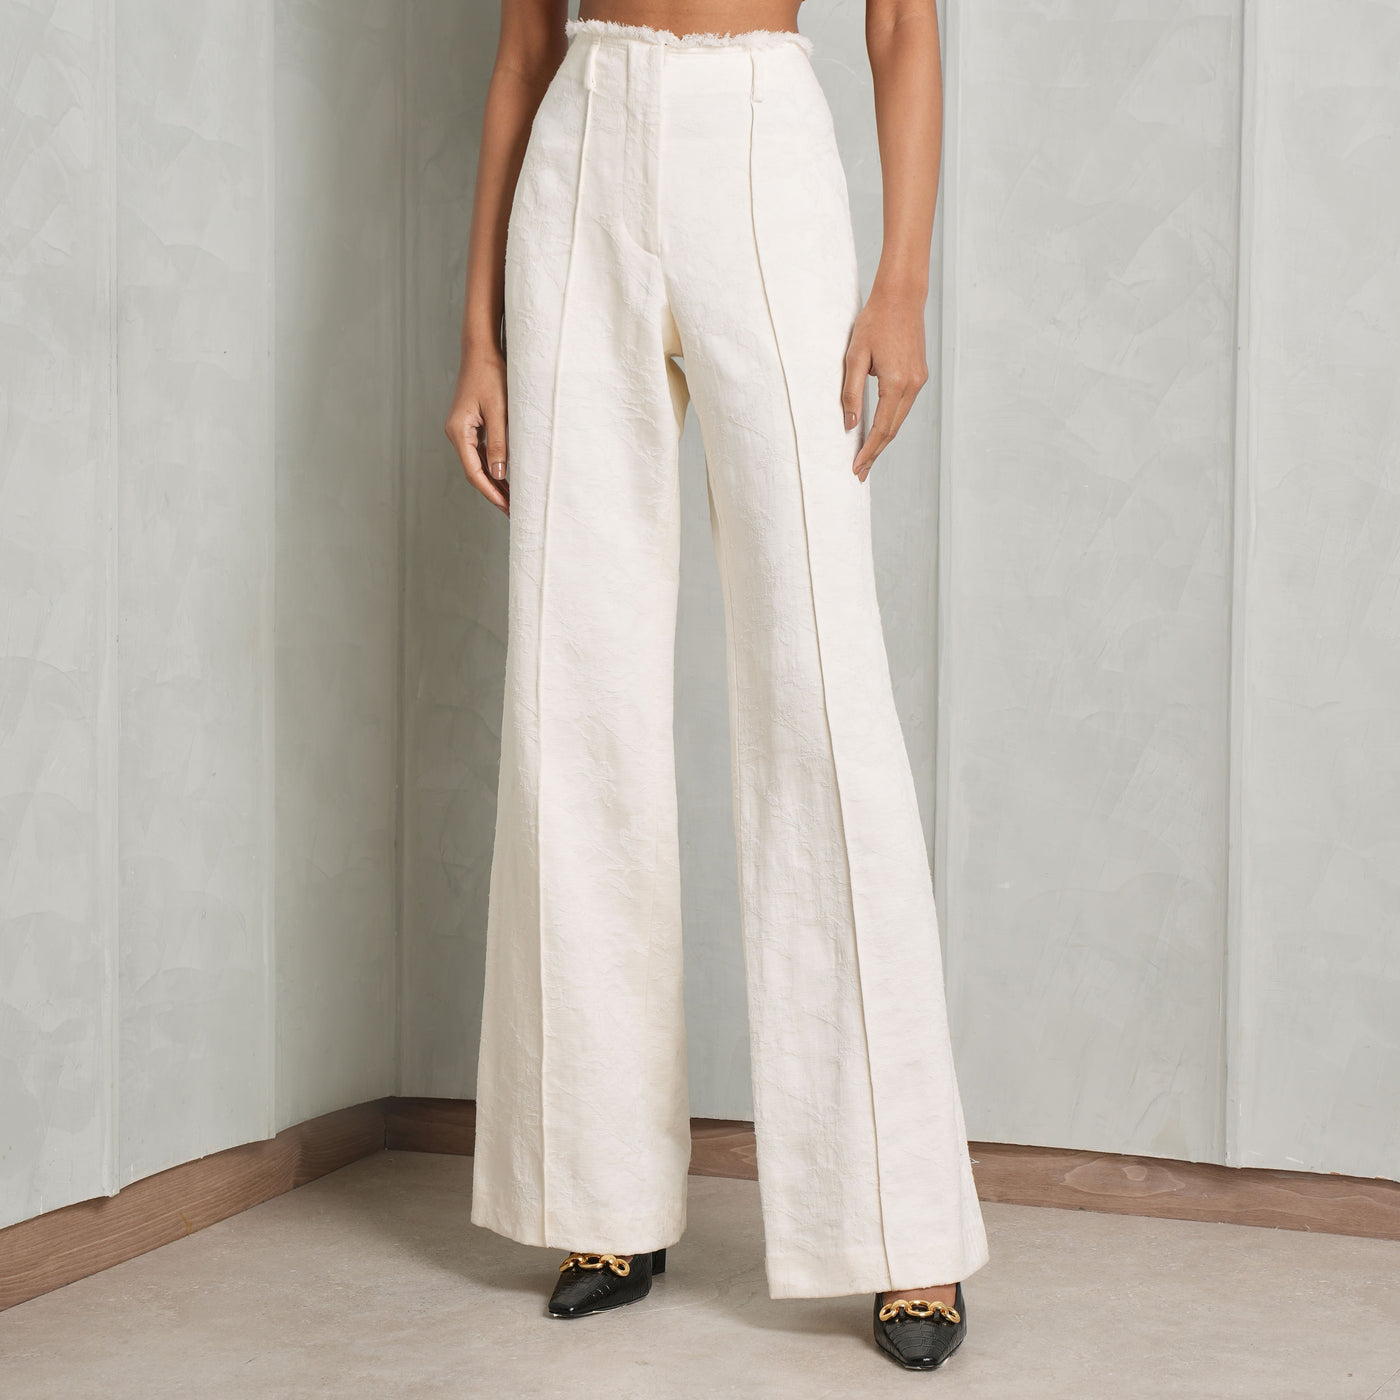 ALEXIS Ivory white Brocade tailored stevi pants